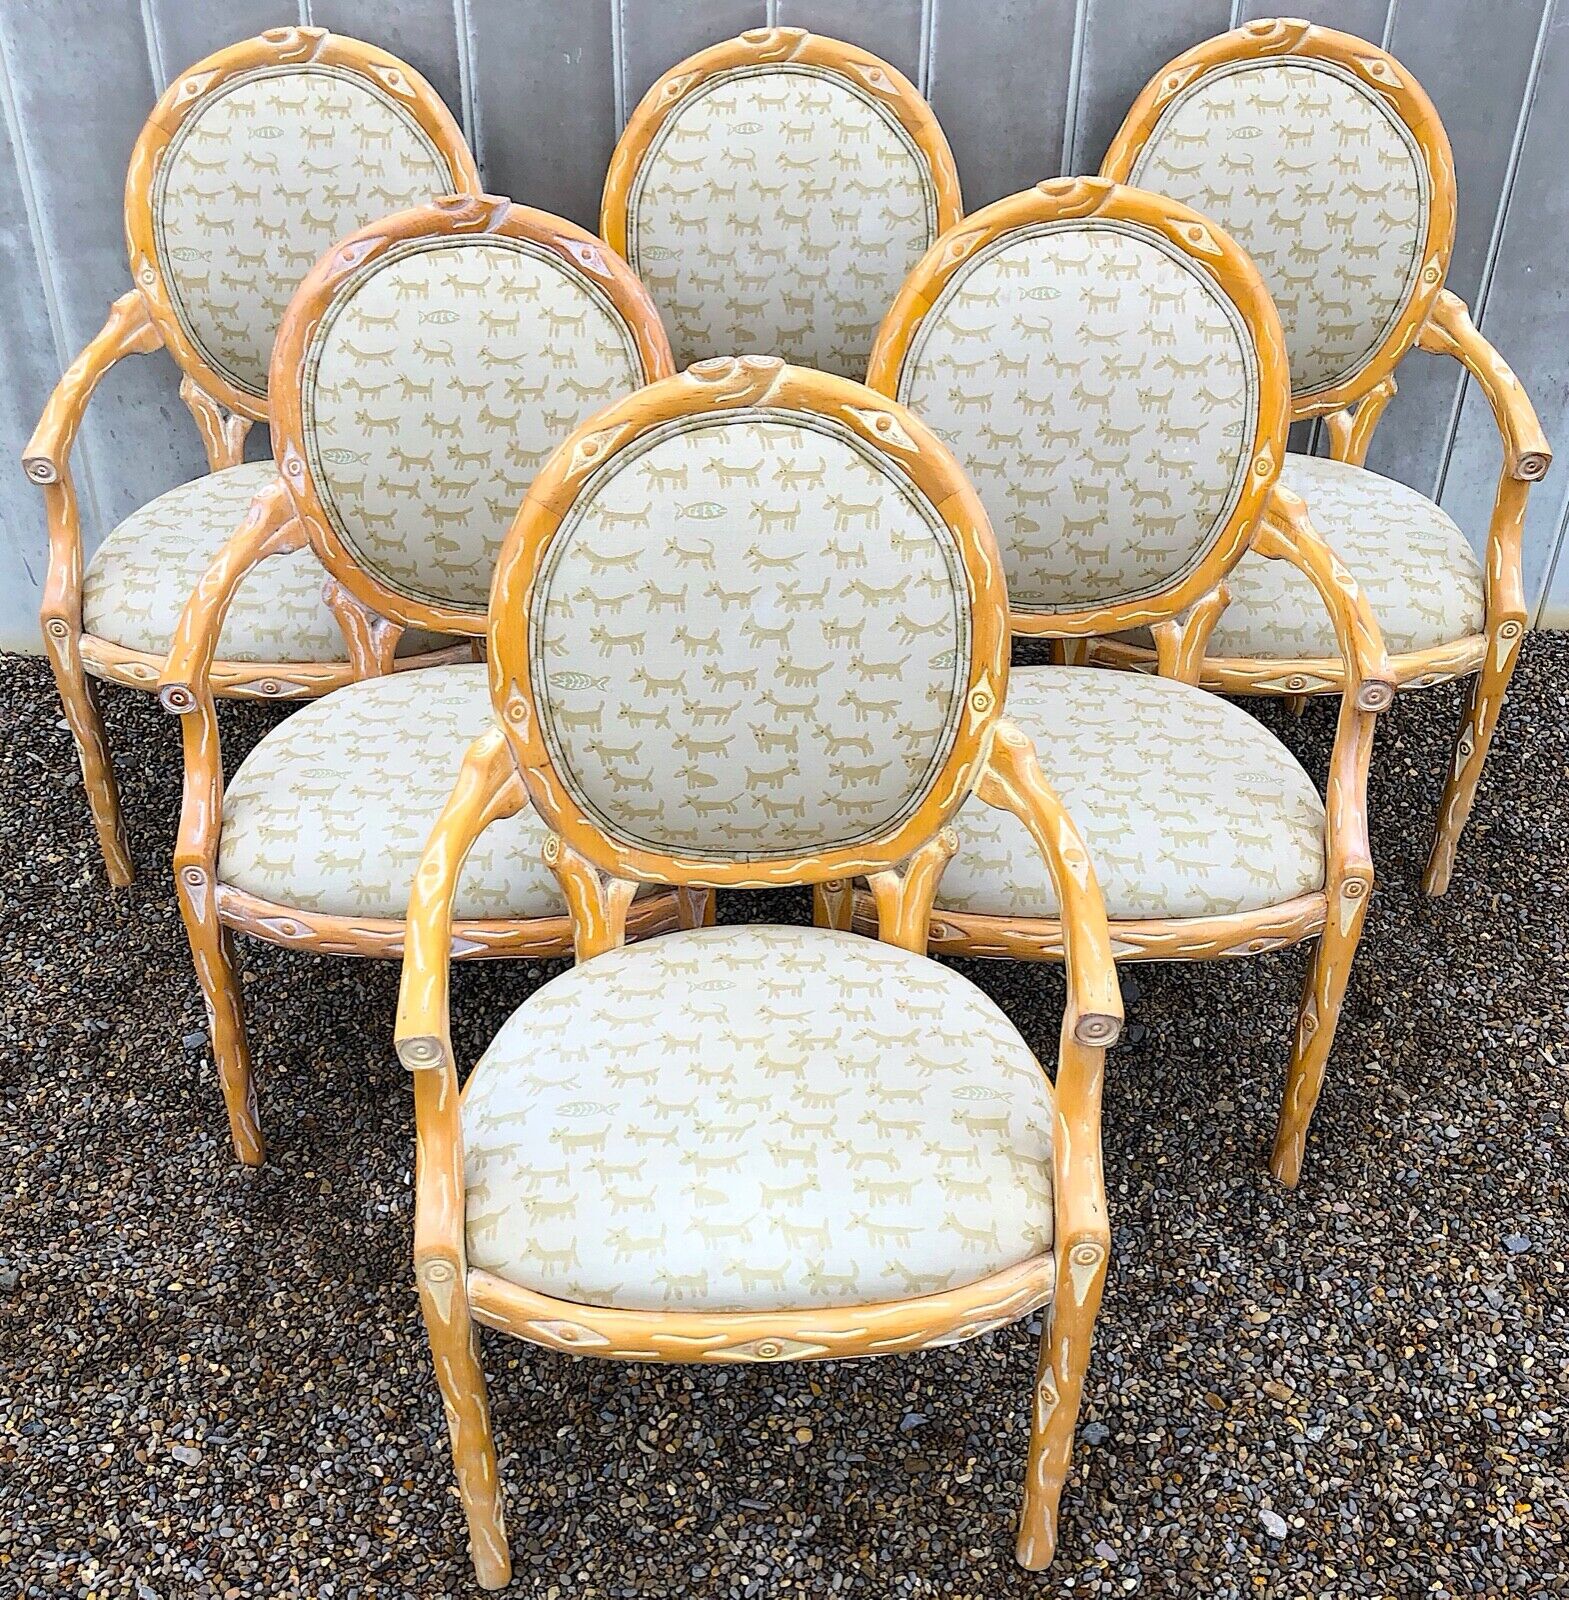 1970s Louis XVI Faux Bois Armchairs With Donghia Upholstery - Set of Six Без бренда - фотография #12